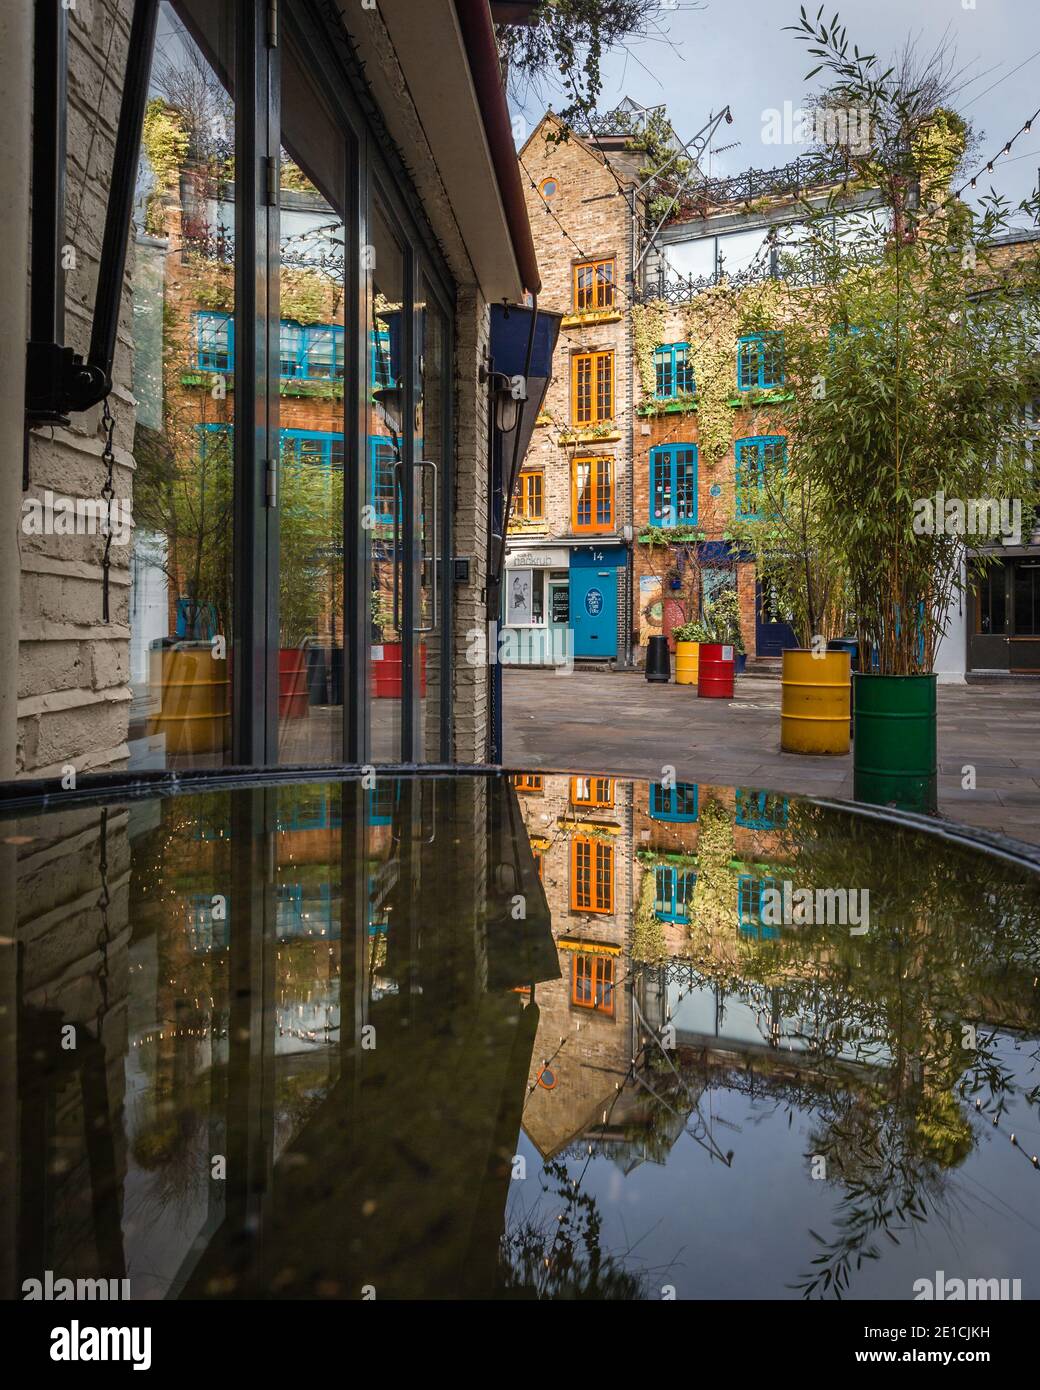 The famous colourful Neal's Yard in London is deserted amidst the coronavirus pandemic, and the London lockdown Stock Photo